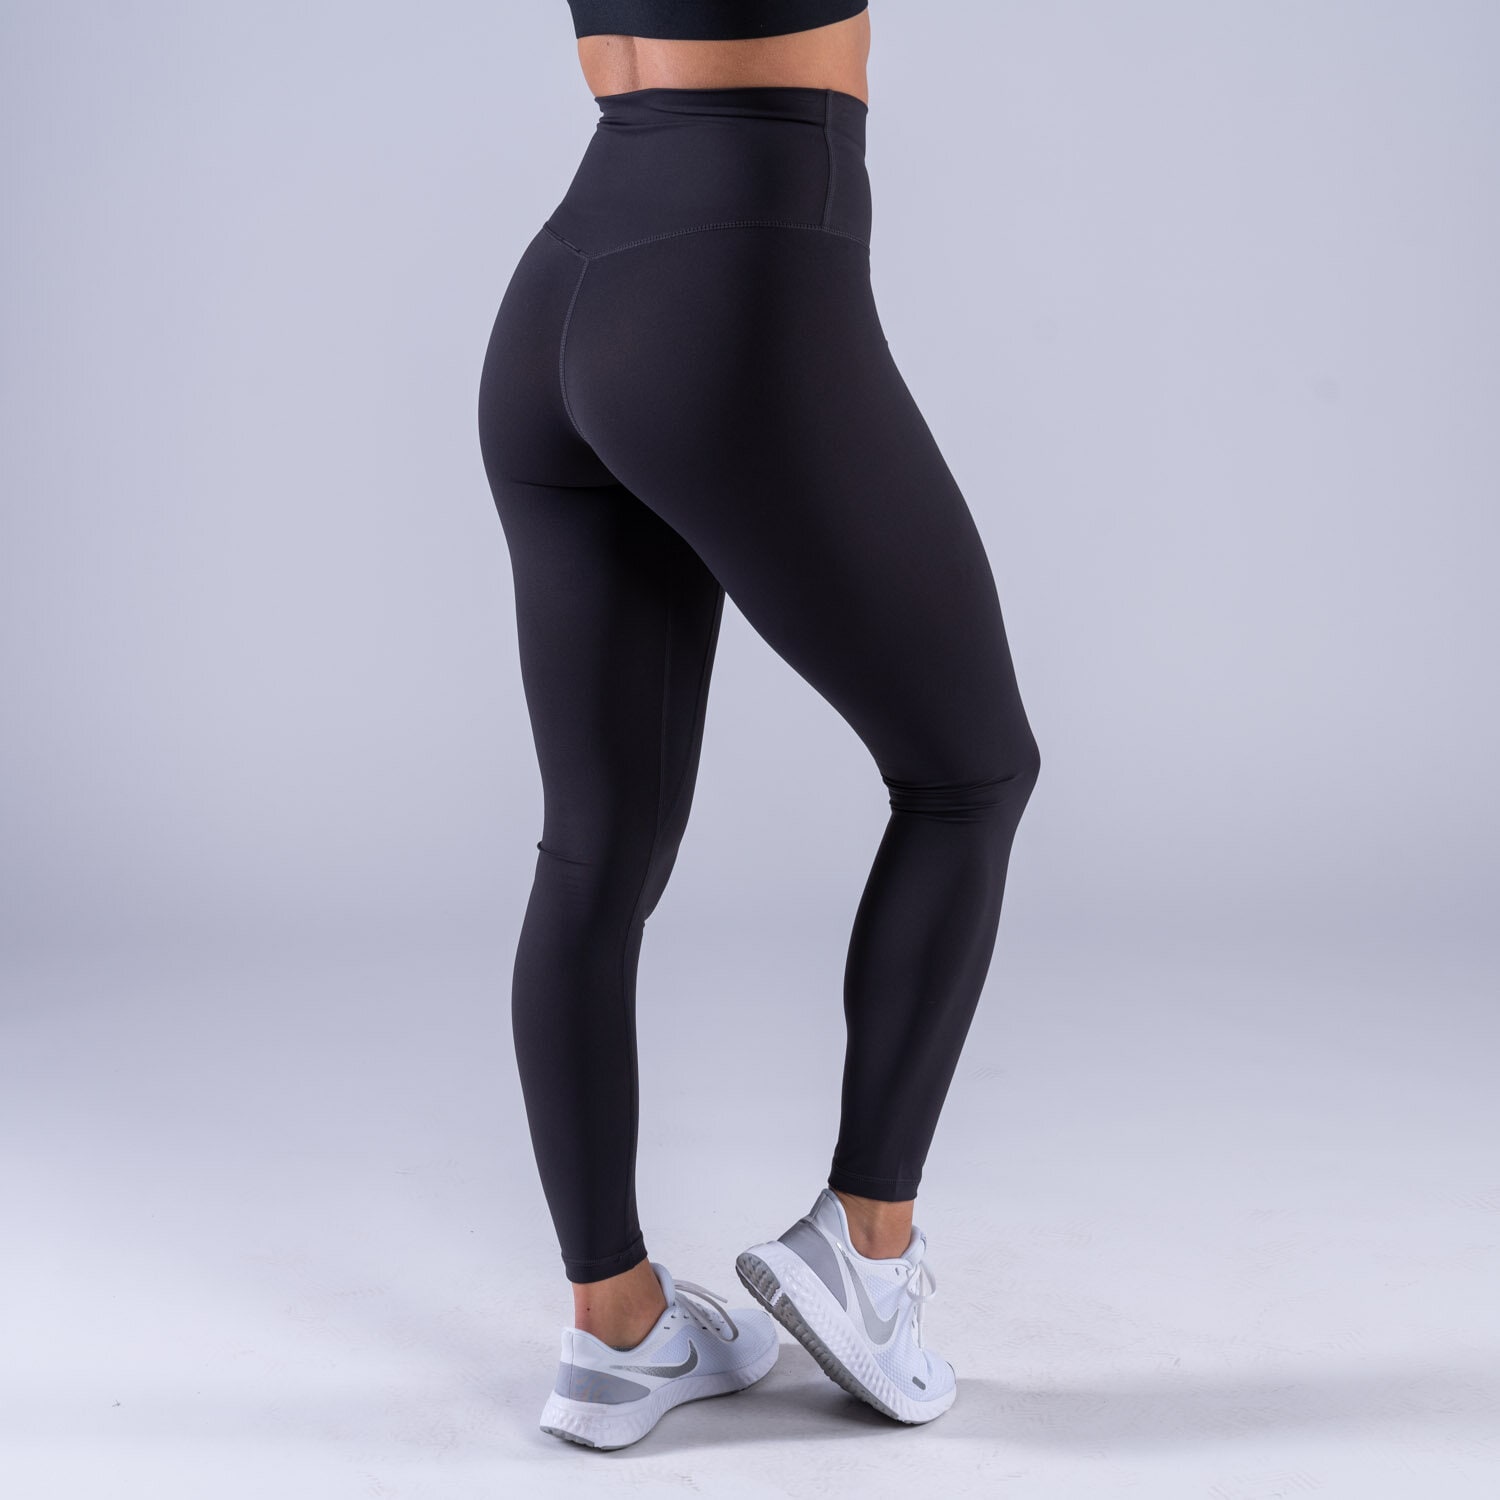 CLN Fuse ws tights Charcoal